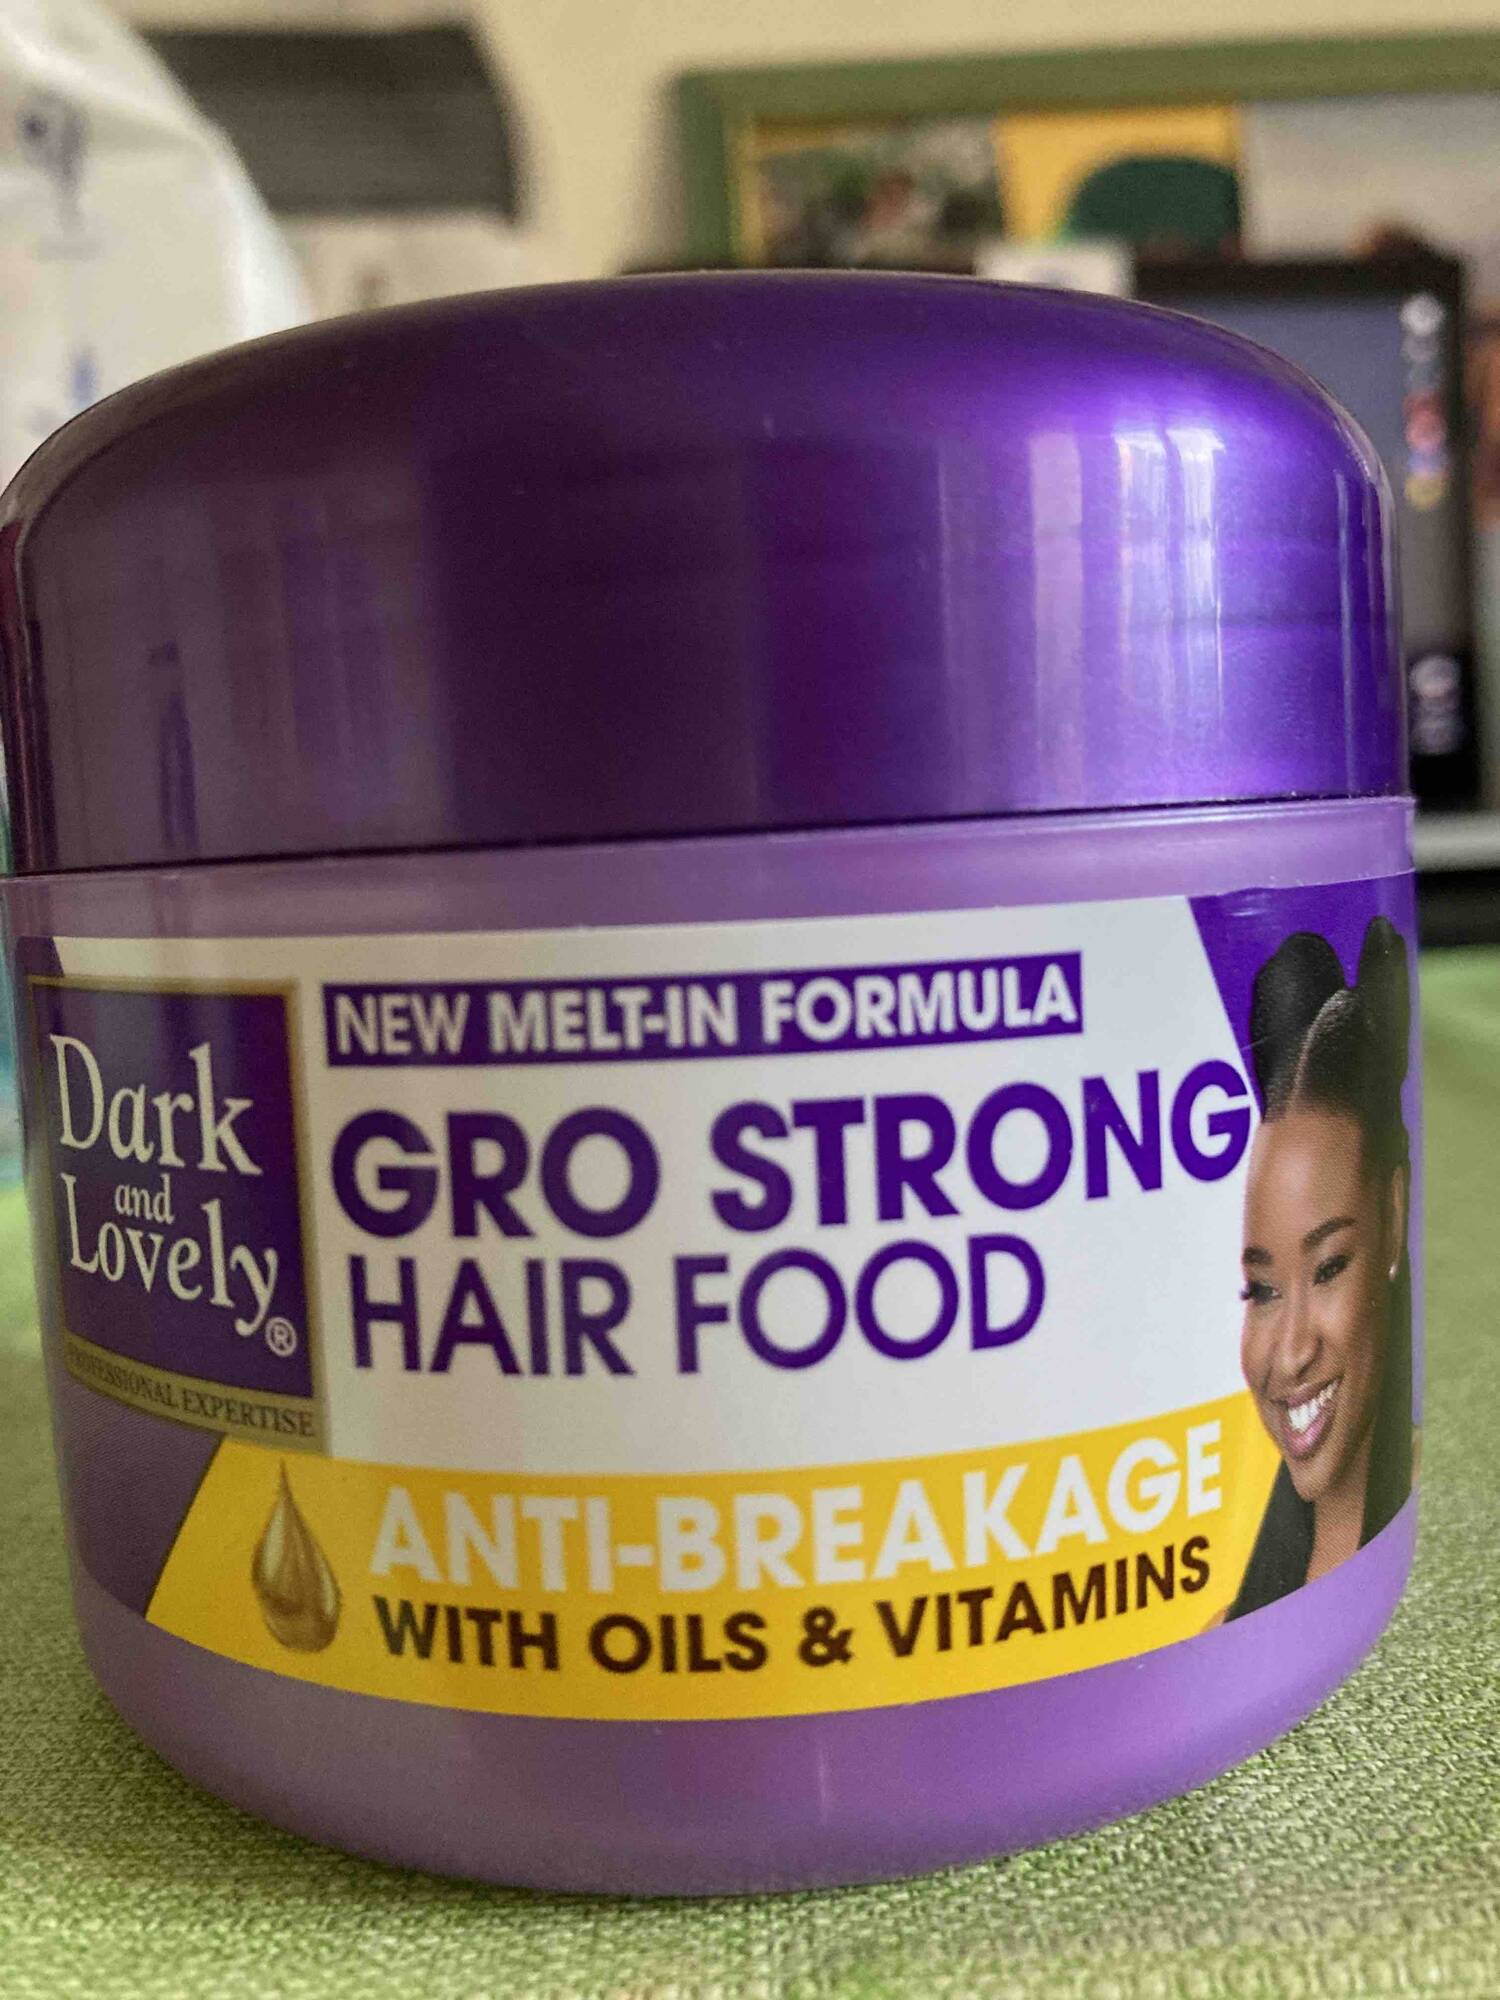 DARK AND LOVELY - Gro strong - Hair food